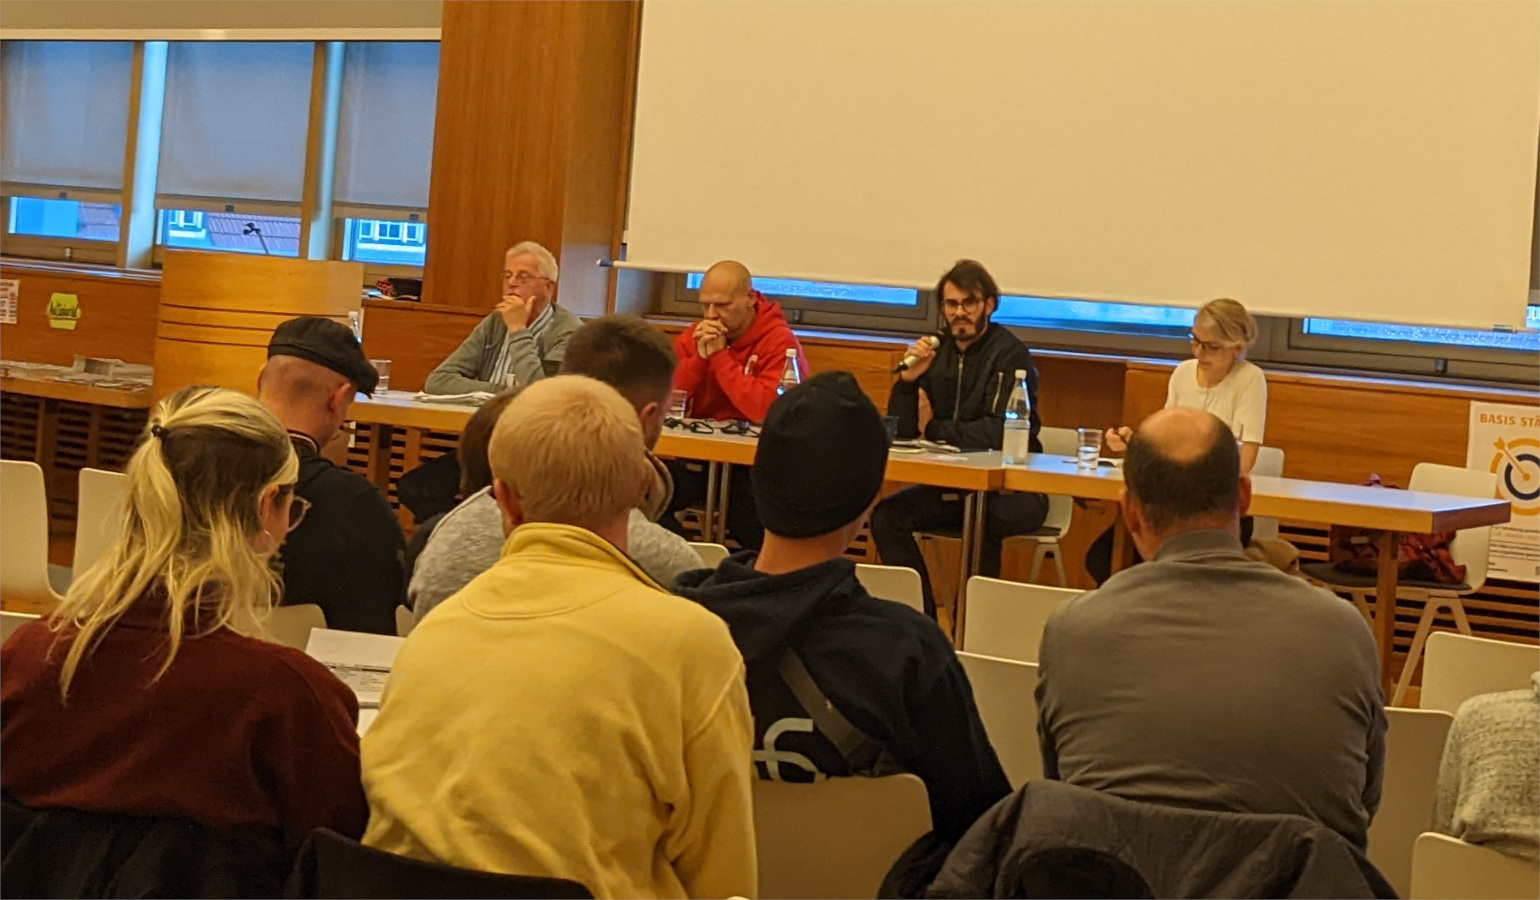 Photograph from the Organisieren, Kämpfen, Gewinnen conference in Germany, September, 2022, which shows four speakers at a table at the front of the room speaking to people (nine shown), with their backs to the photographer.